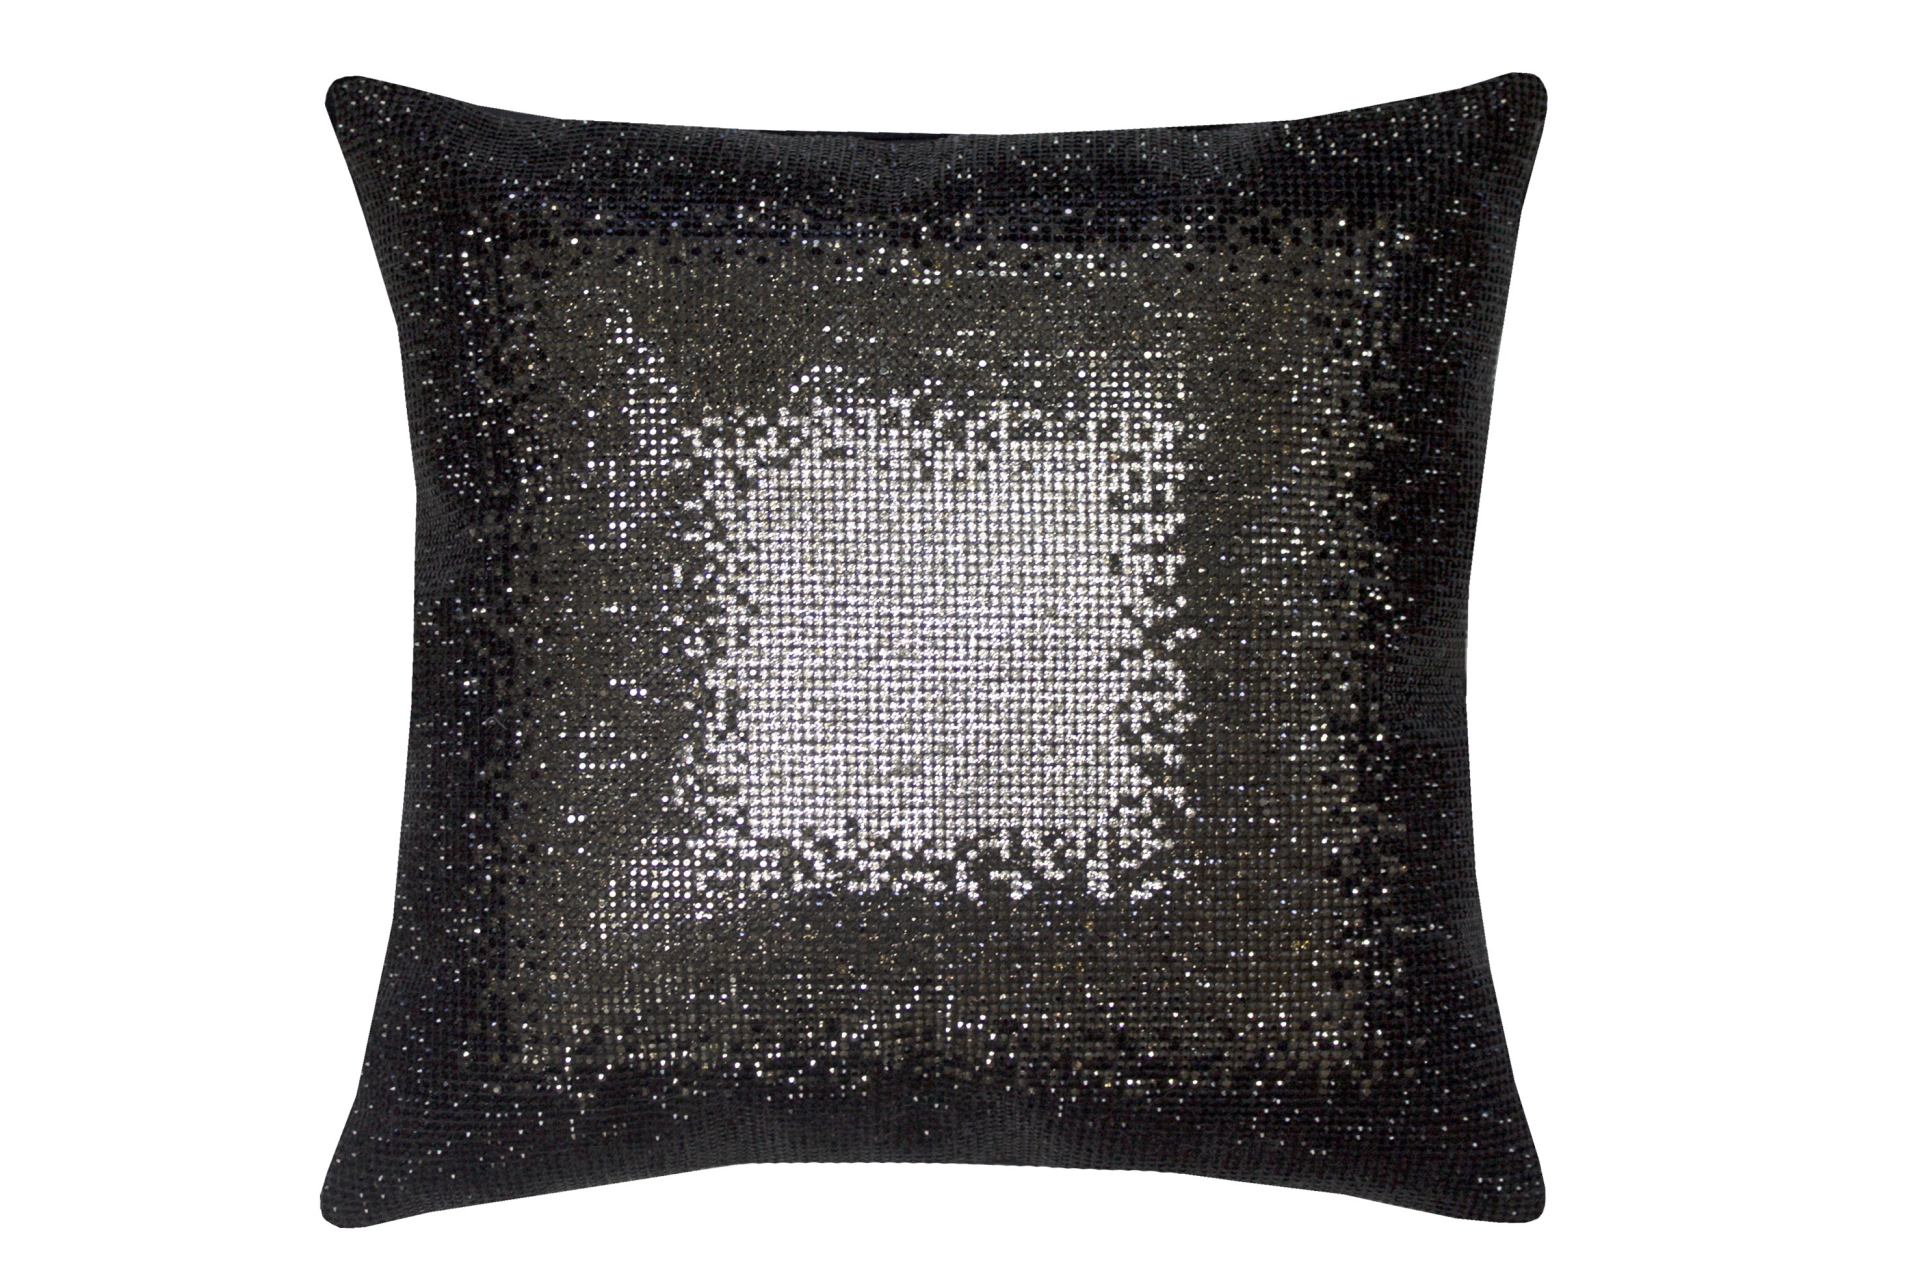 Top 5 Cushion Trends for your Living Room!